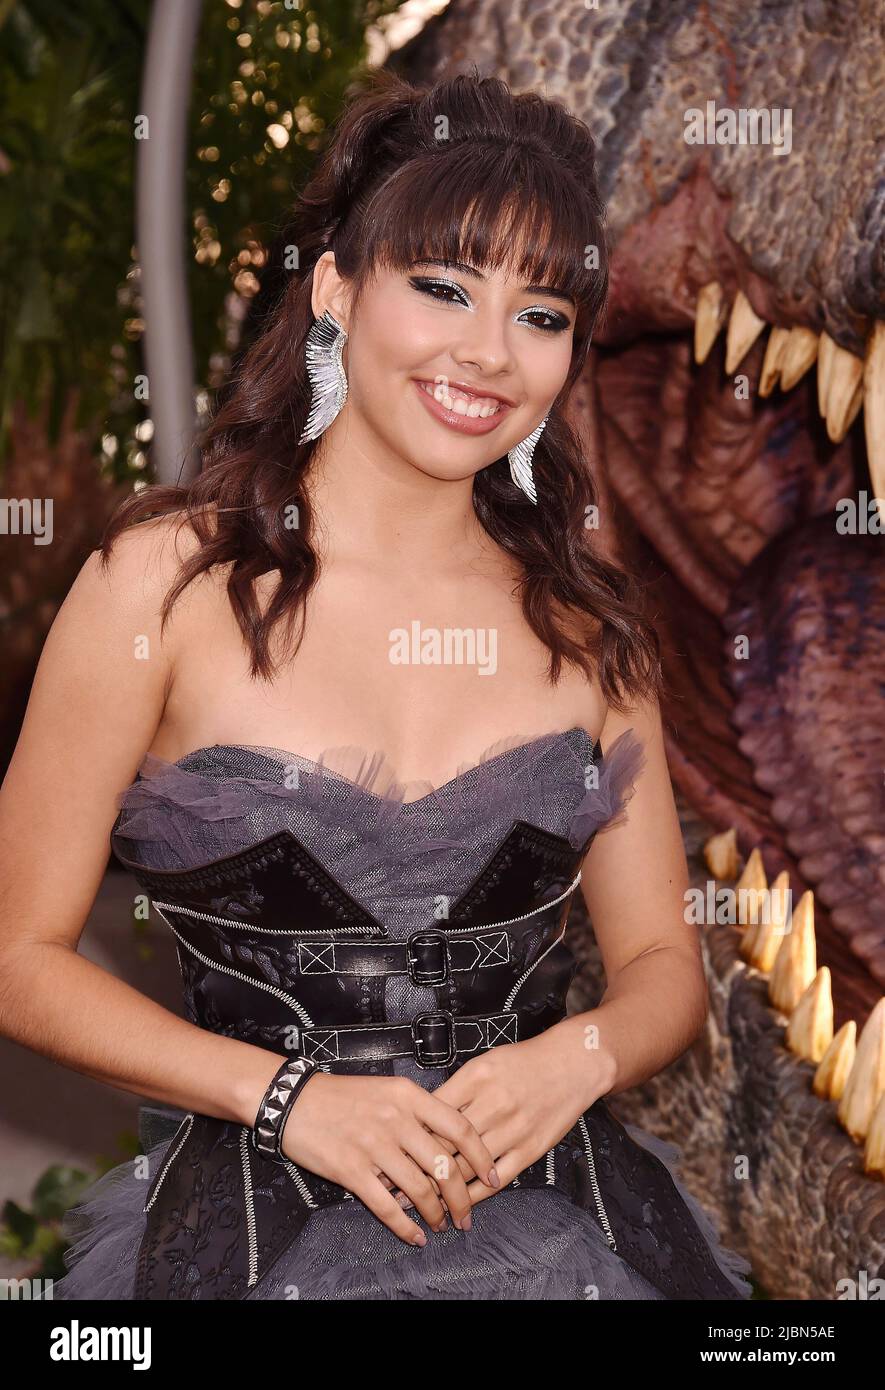 HOLLYWOOD, CA - JUNE 06: Xochitl Gomez attends the Los Angeles premiere of Universal Pictures' 'Jurassic World Dominion' at the TCL Chinese Theatre on Stock Photo